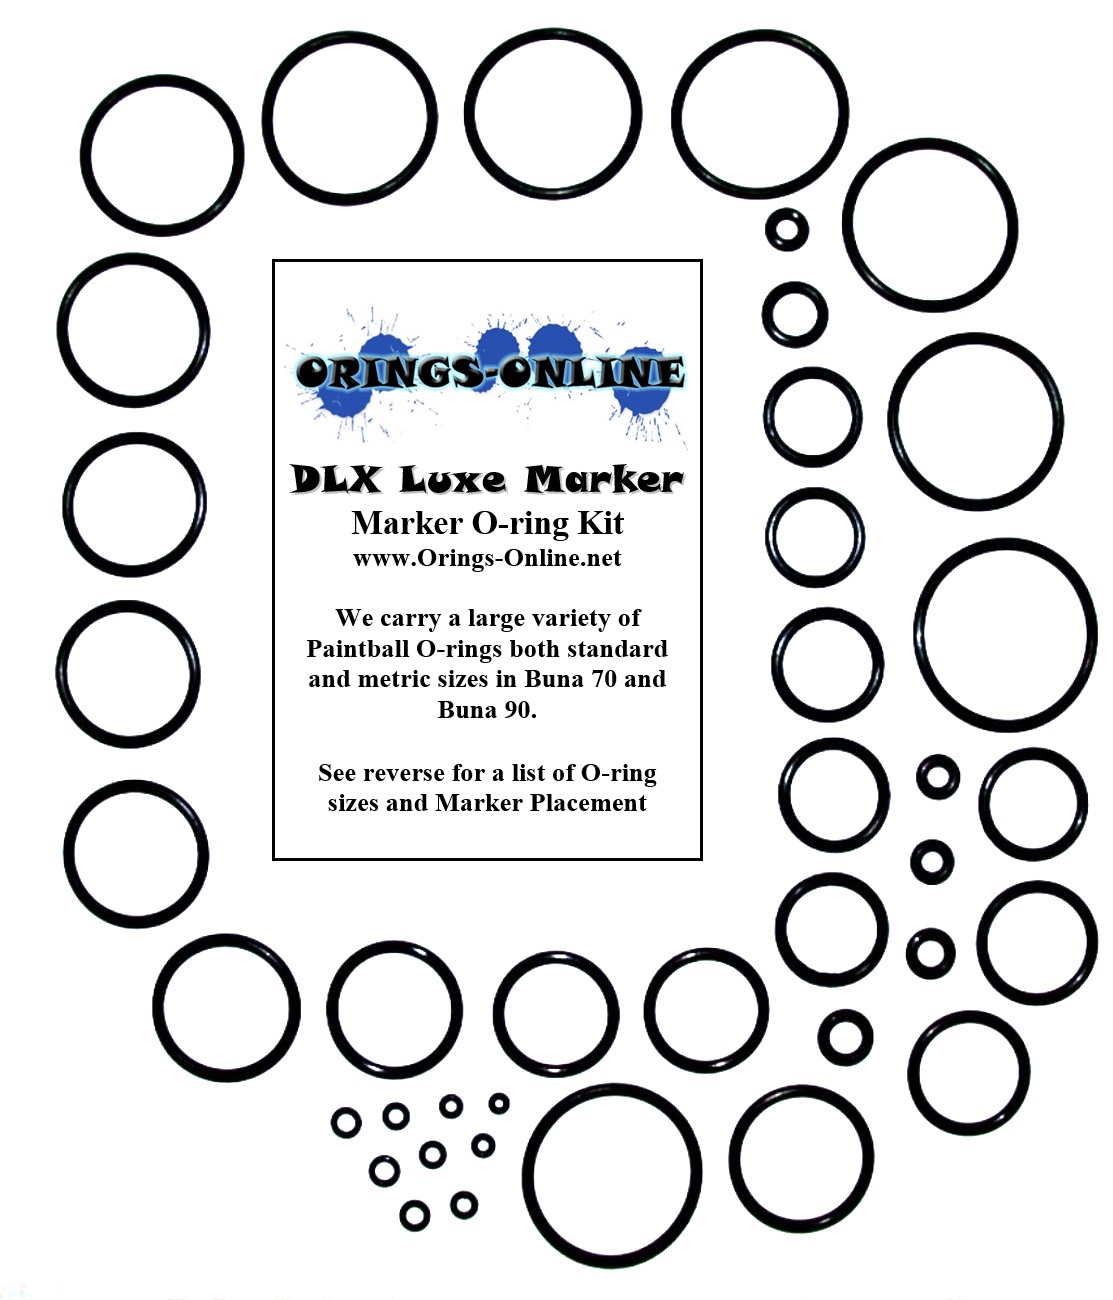 DLX Luxe Marker O-ring Kit